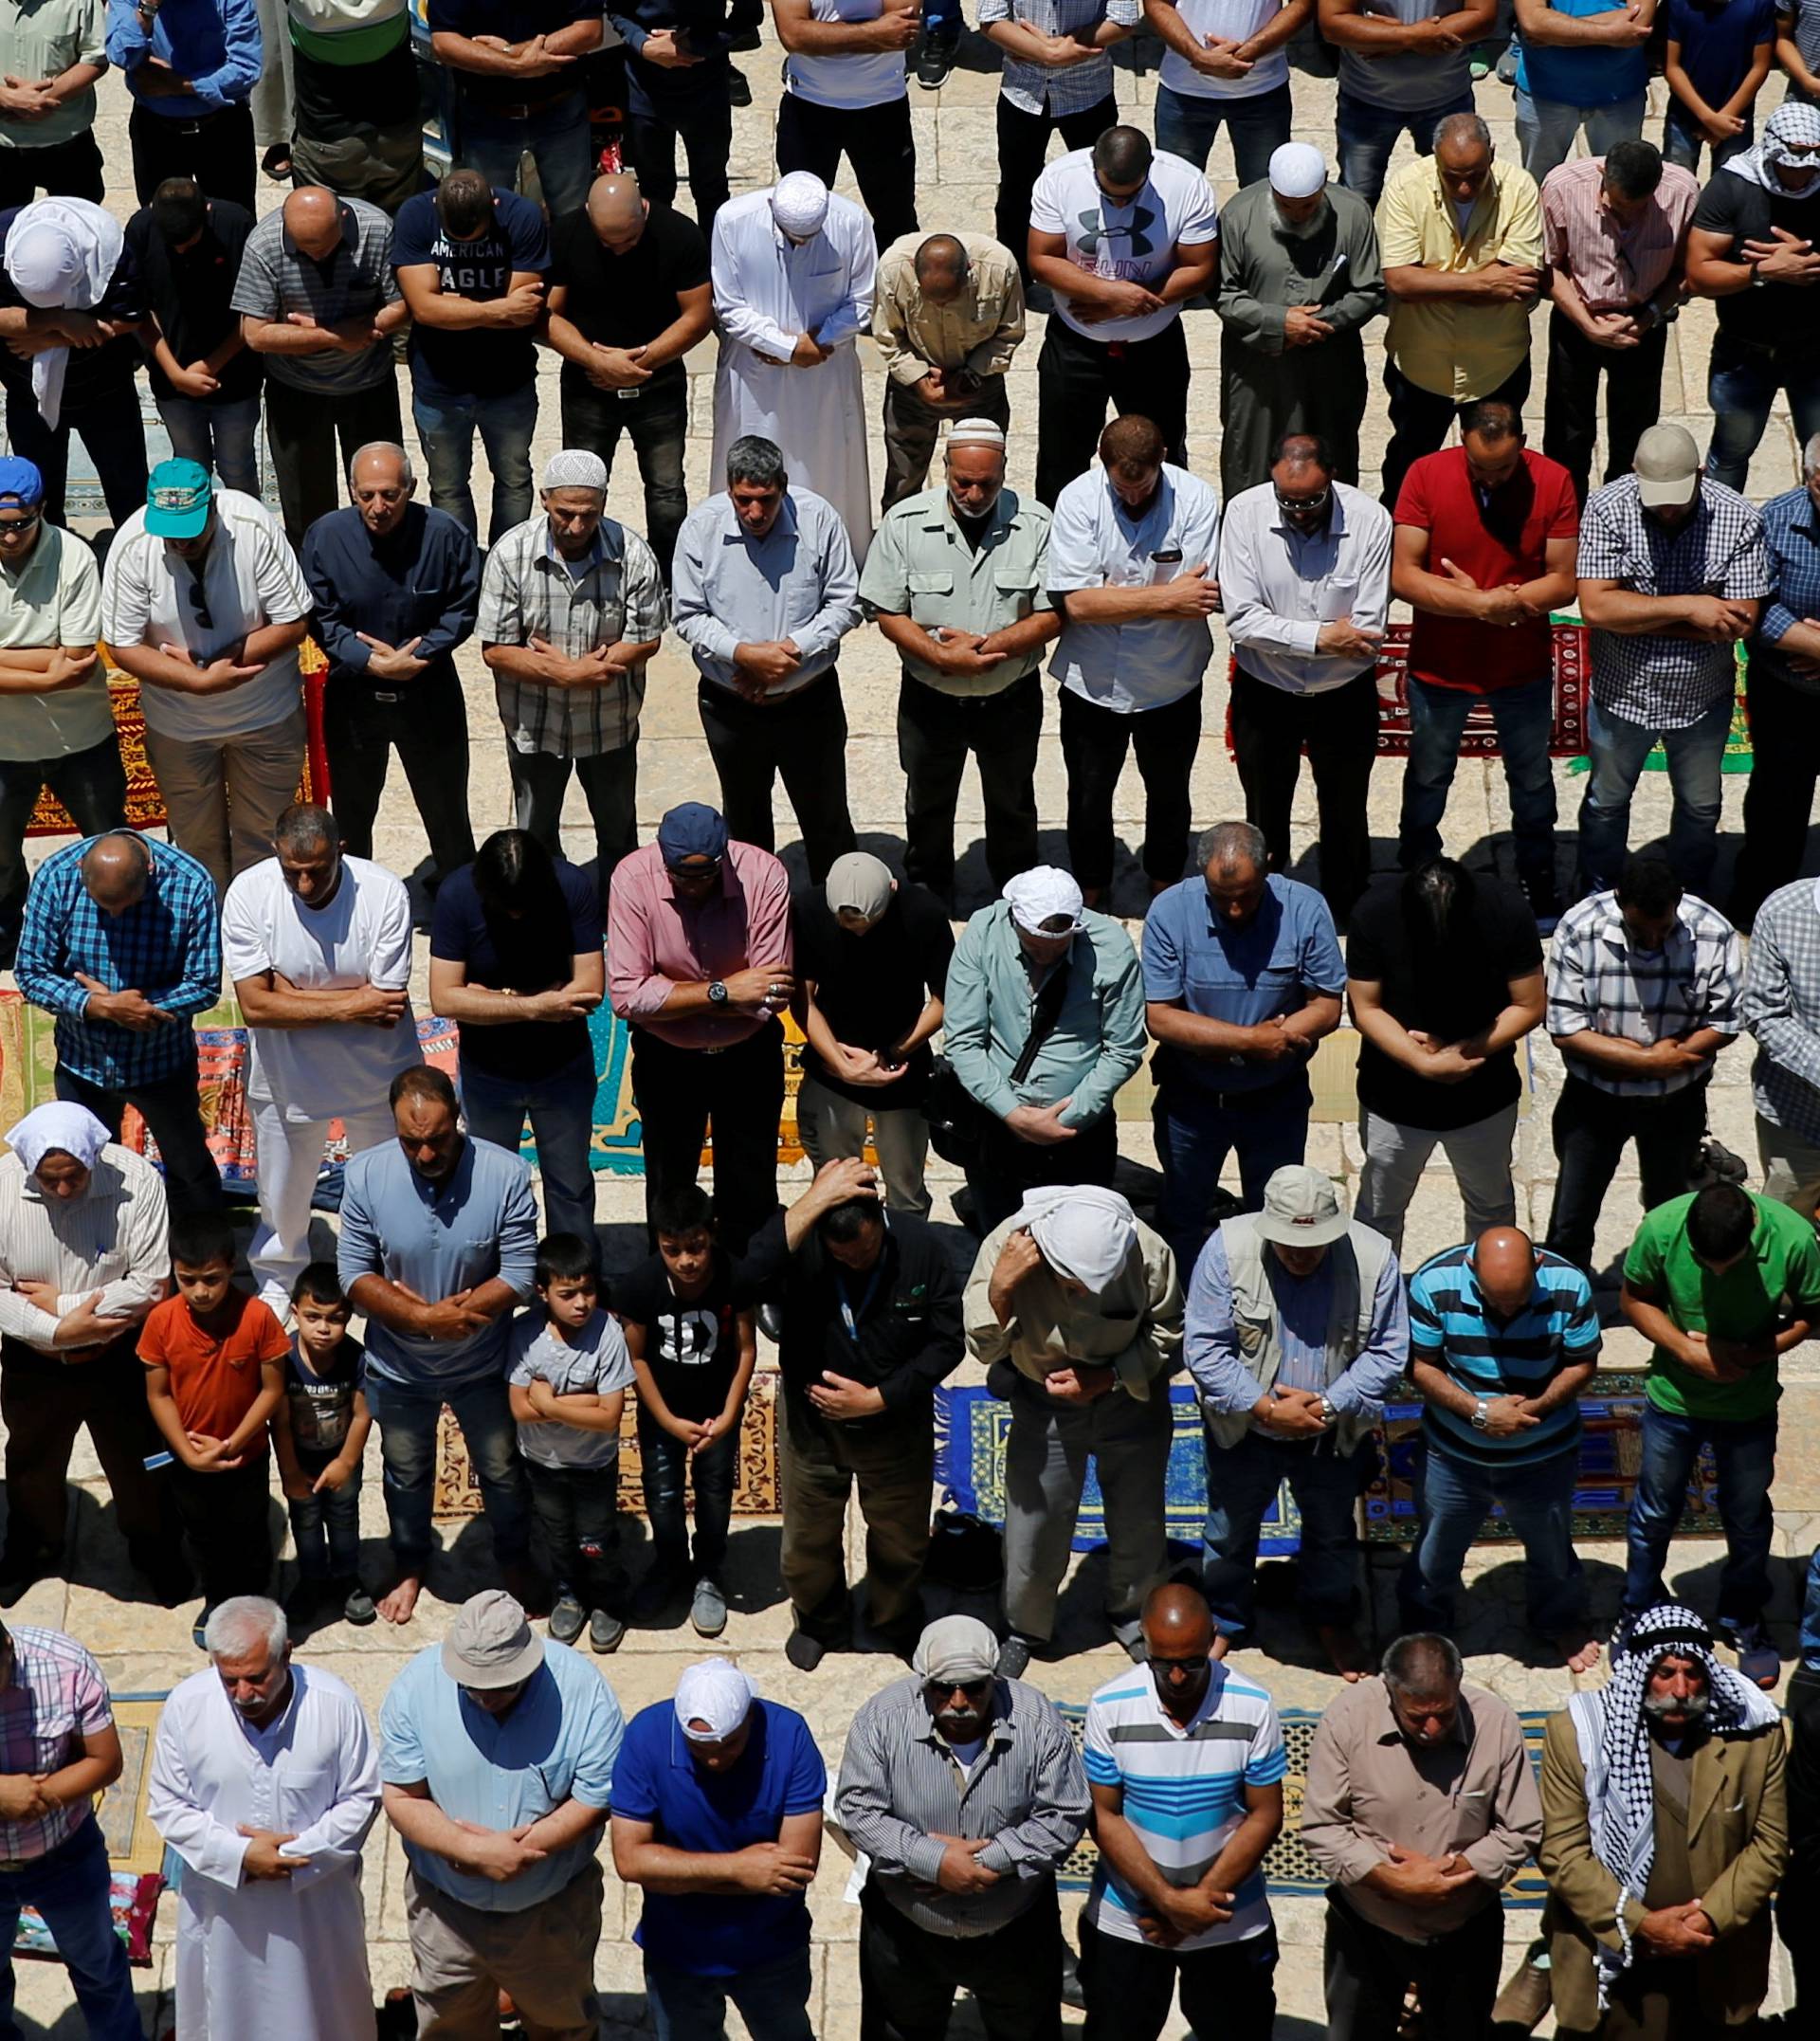 Palestinian men prays on the first Friday of the holy fasting month of Ramadan on the compound known to Muslims as Noble Sanctuary and to Jews as Temple Mount in Jerusalem's Old City